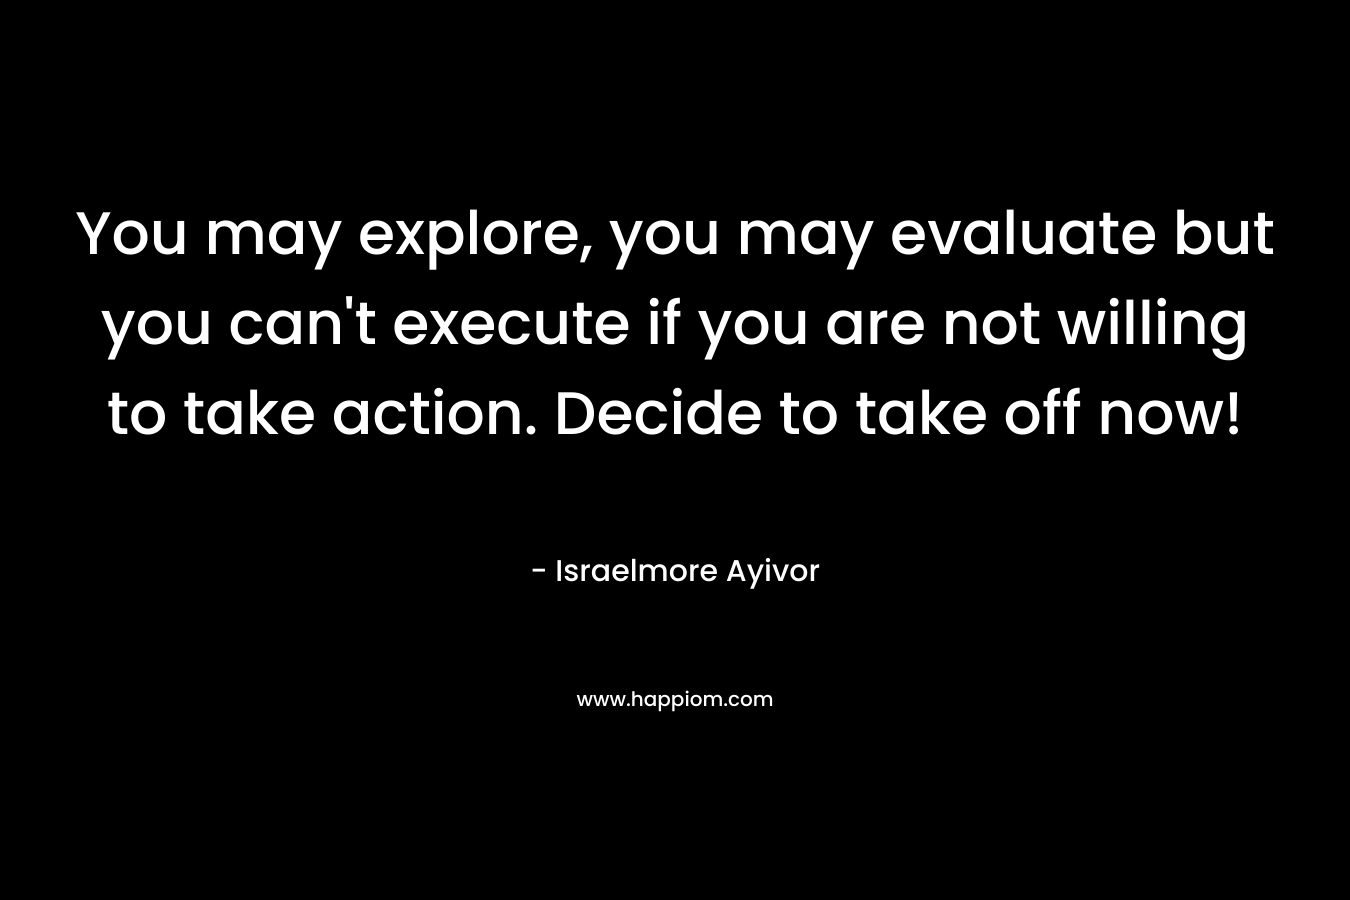 You may explore, you may evaluate but you can’t execute if you are not willing to take action. Decide to take off now! – Israelmore Ayivor